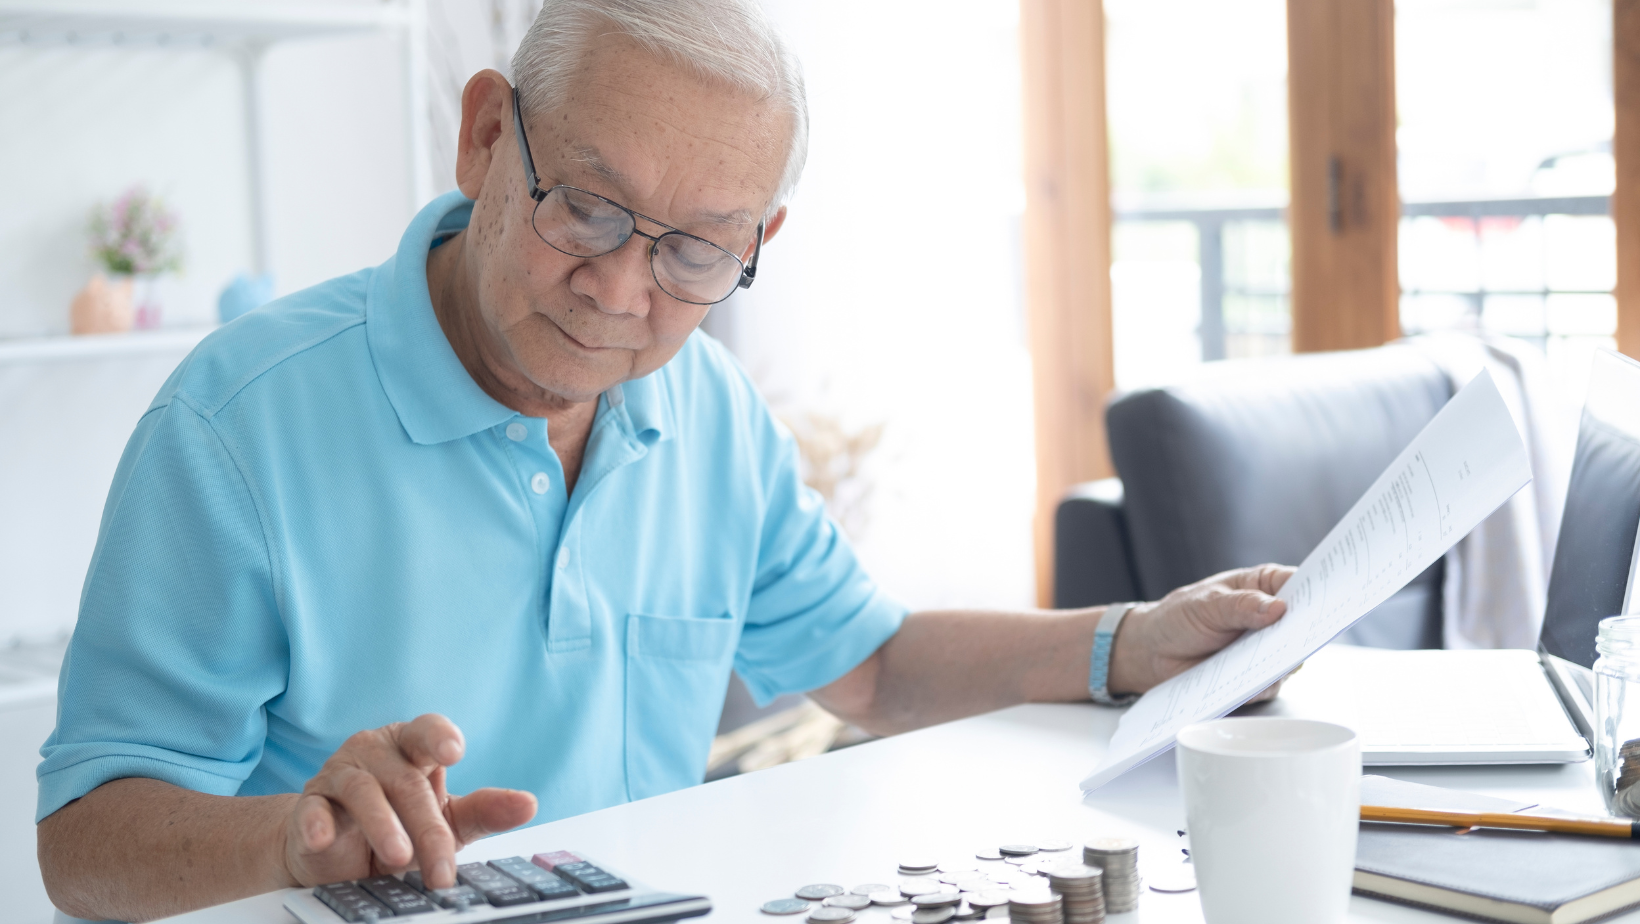 5 Ways to Grow Retirement Fund Grow And Make It Last Through Retirement